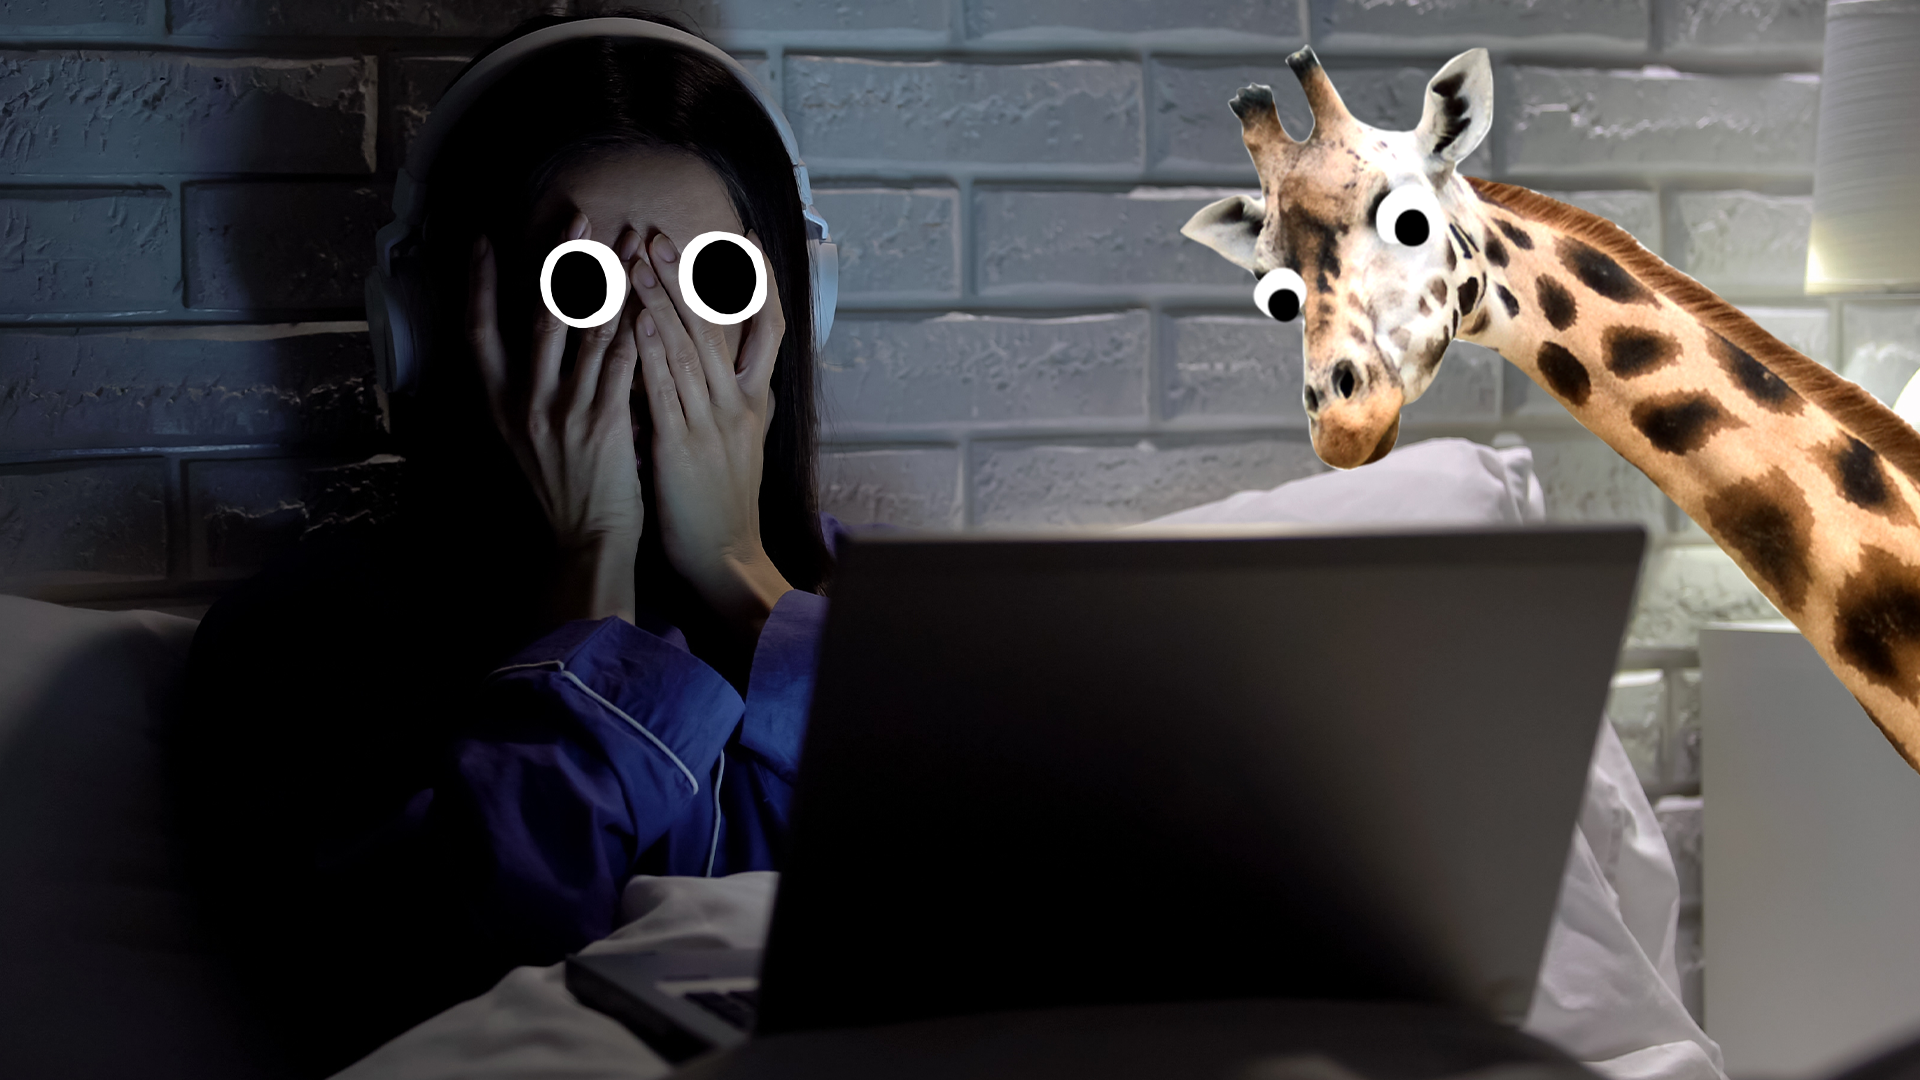 Scared woman looking at laptop with derpy giraffe